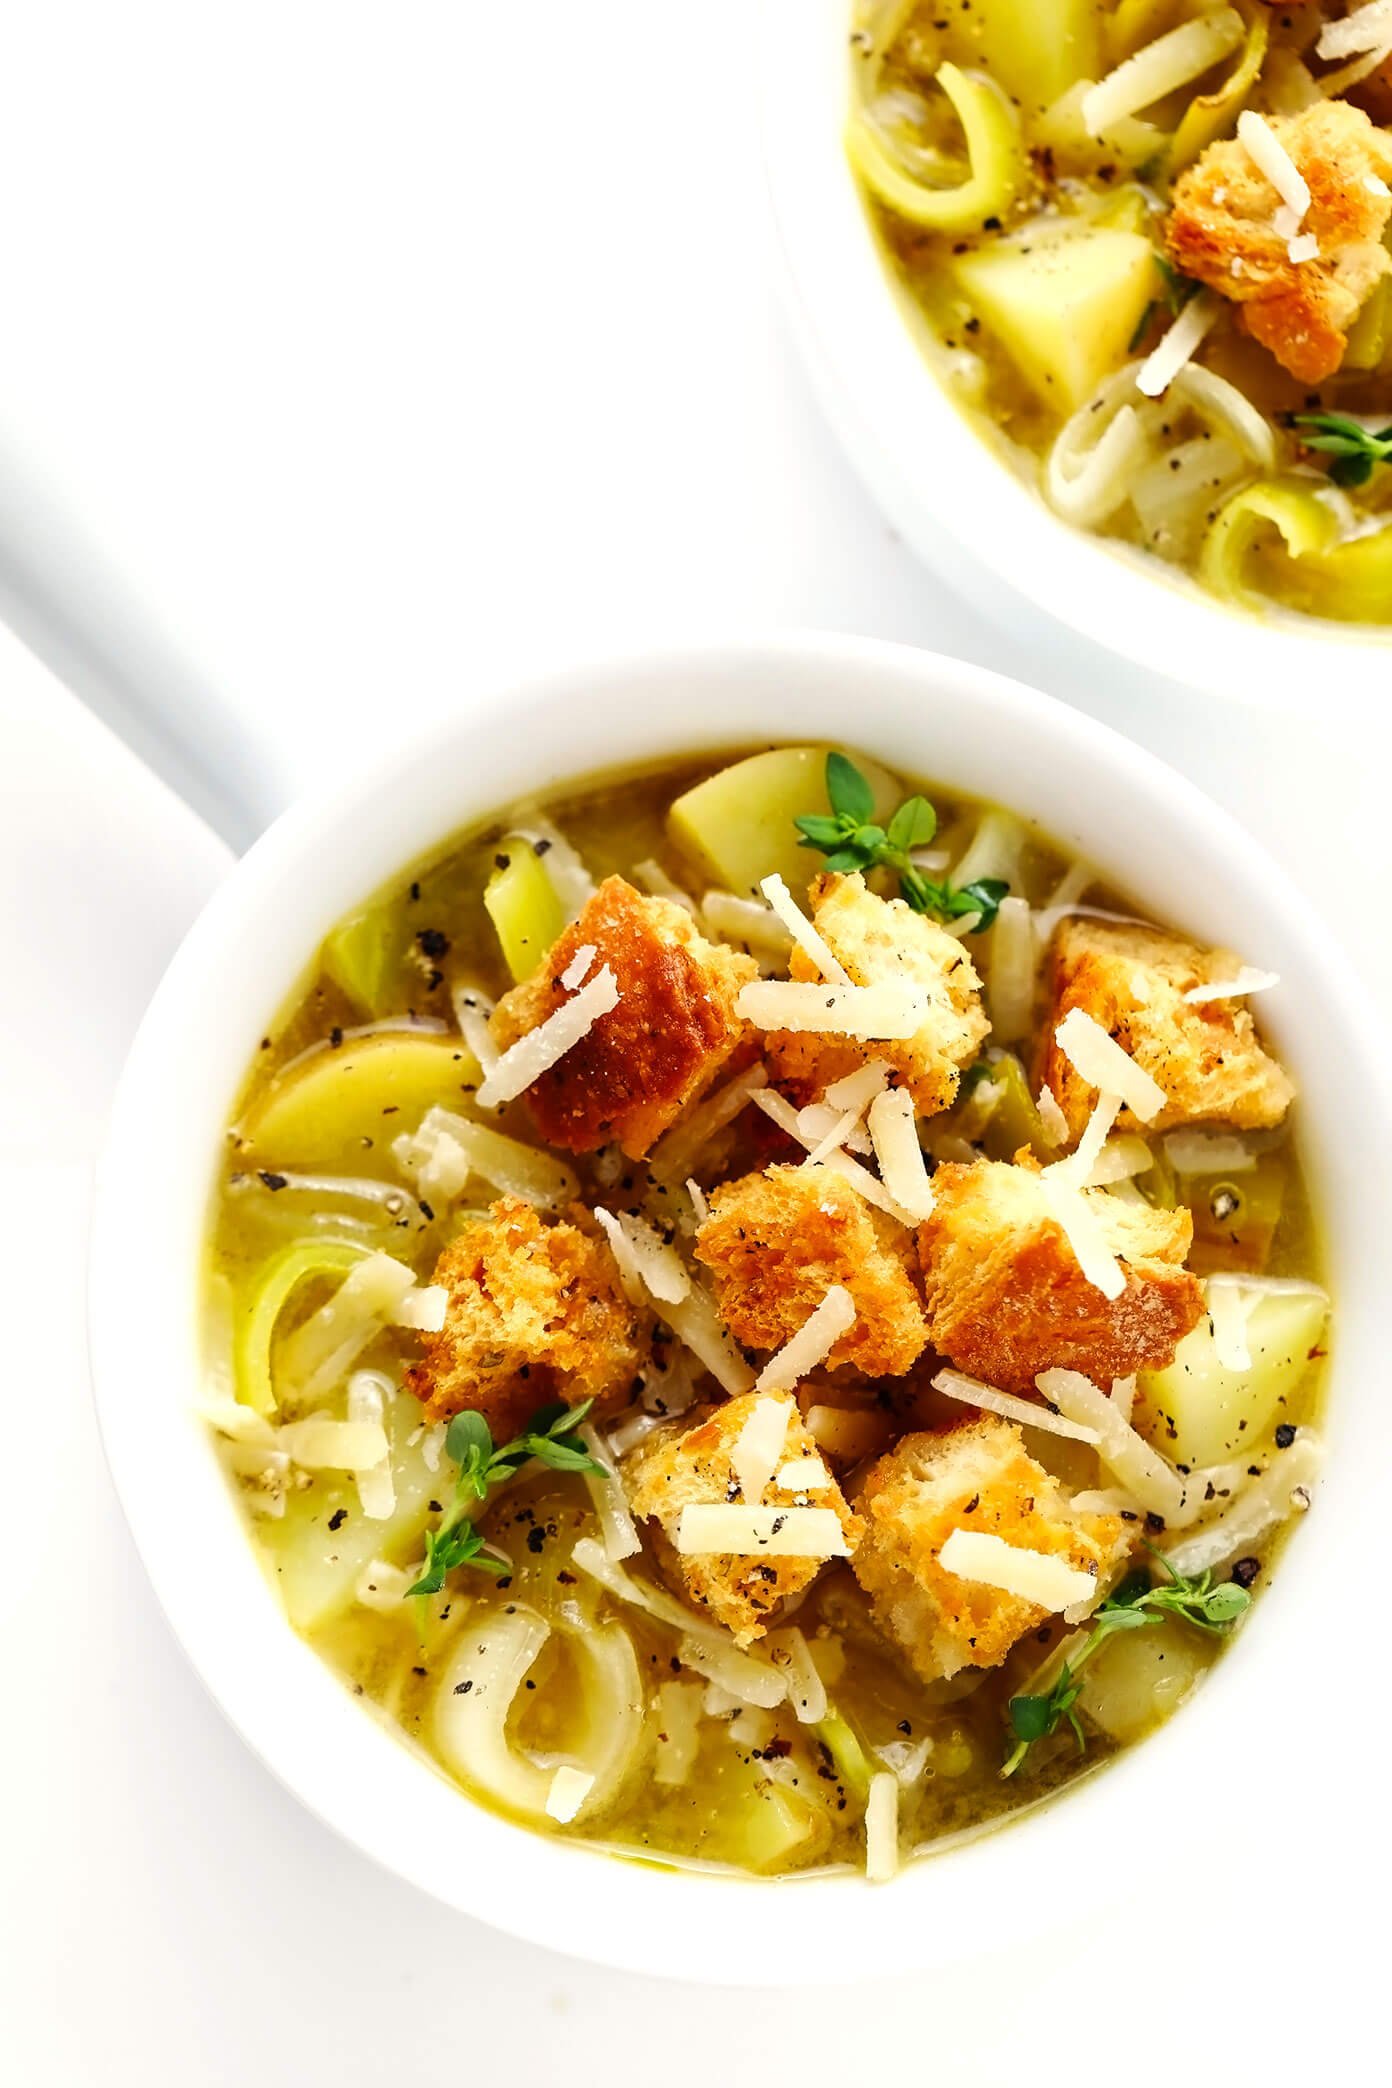 Bowls of Rustic Potato Leek Soup with Homemade Croutons and Parmesan